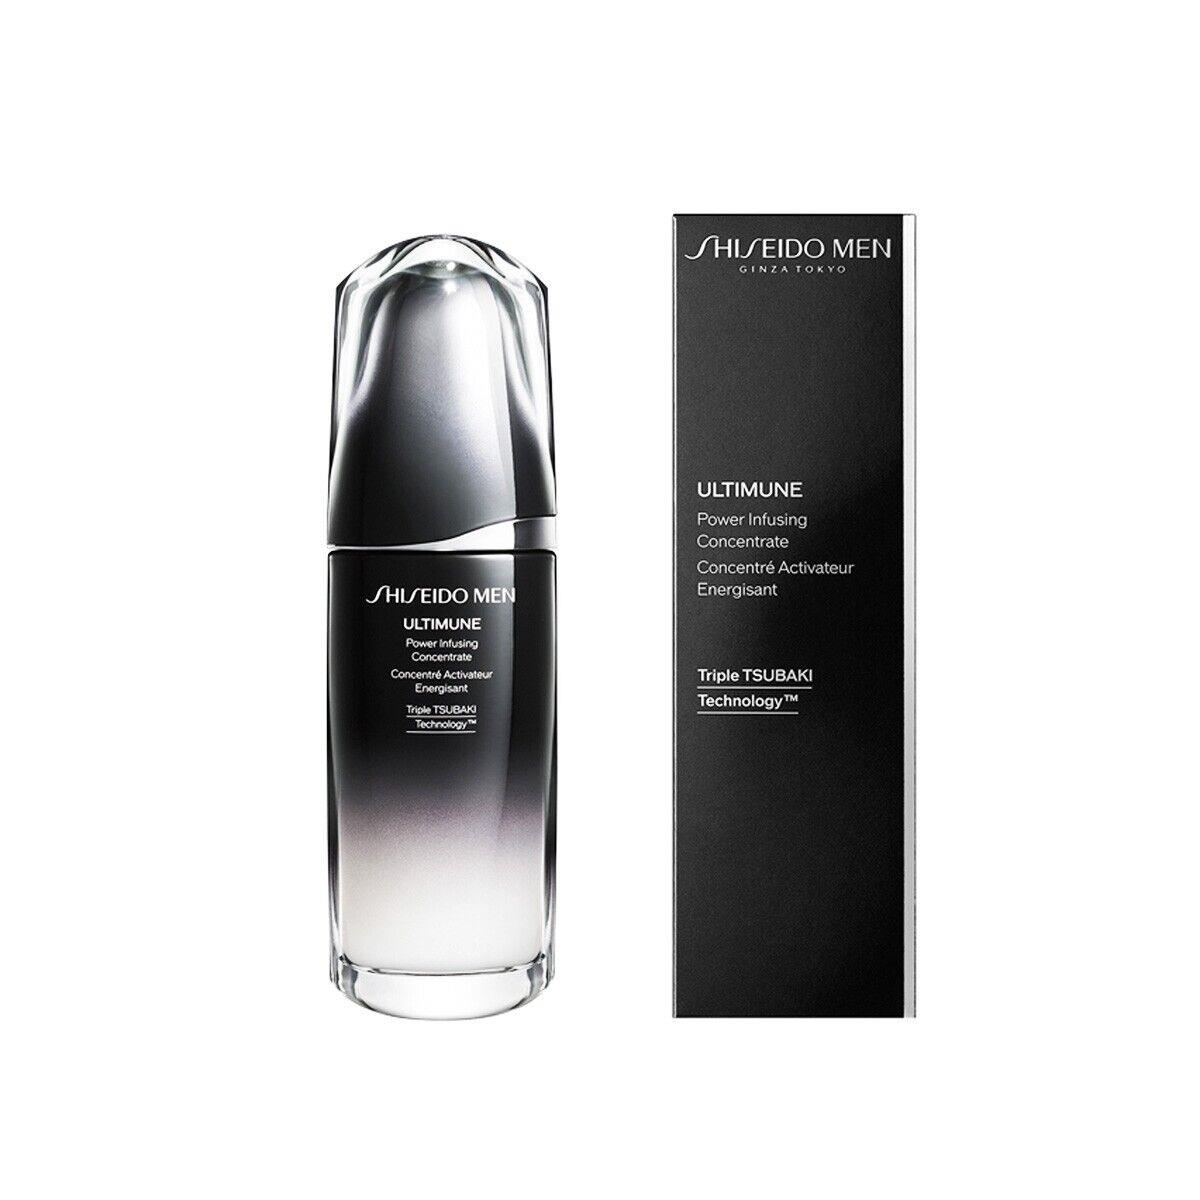 Shiseido Men Ultimune Power Infusing Concentrate - Large Size 75mL / 2.7 Oz